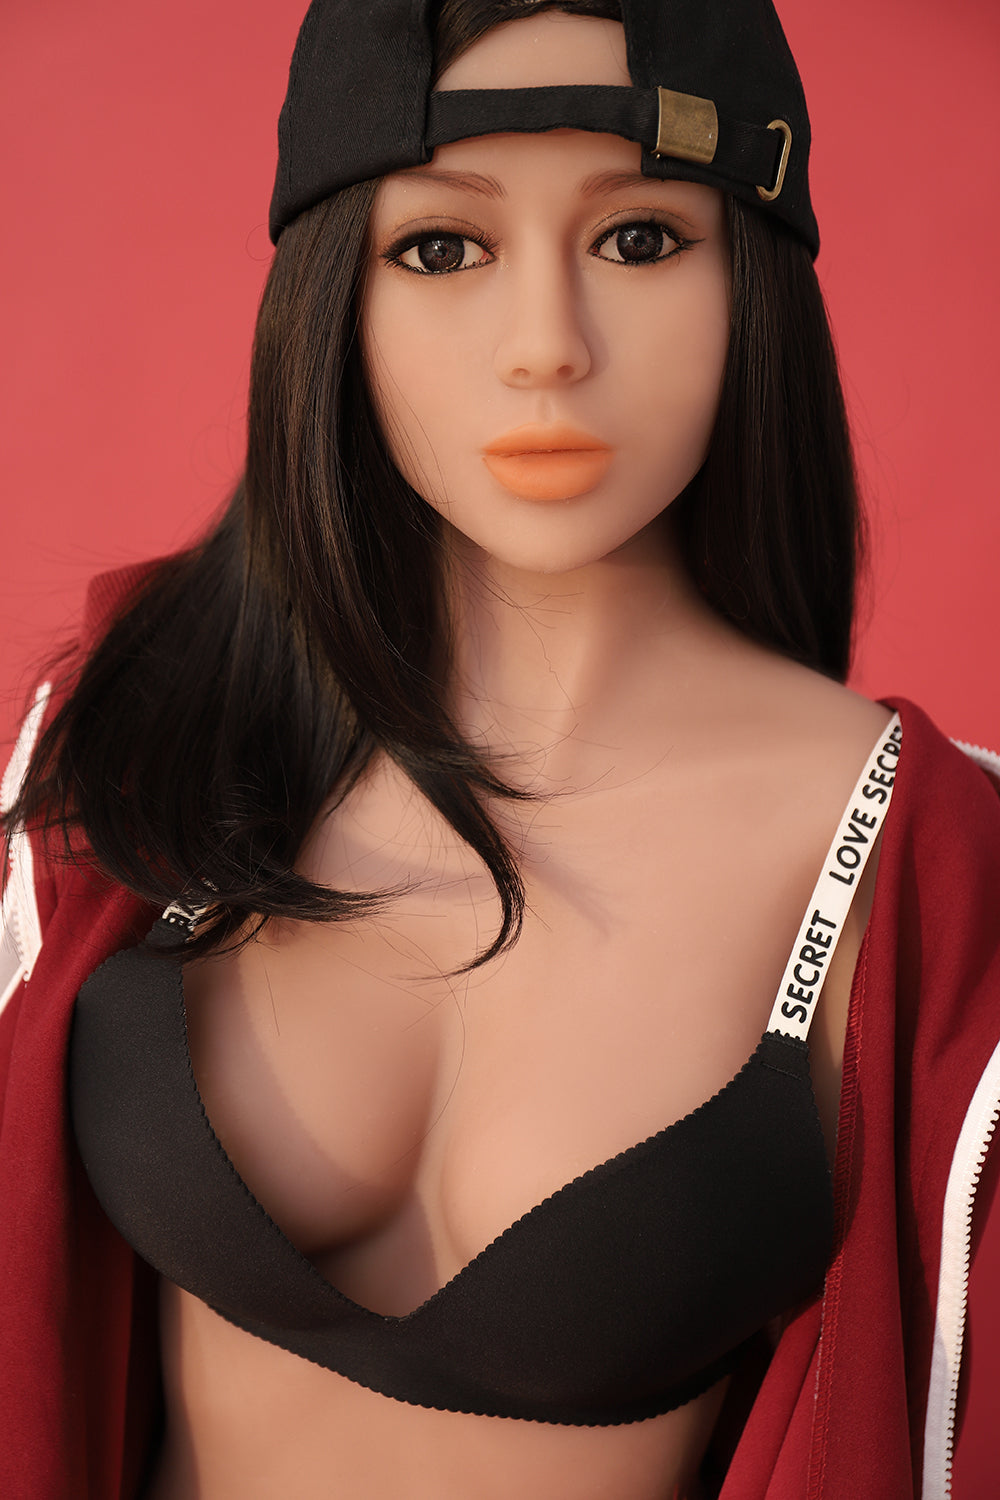 Kingmansion Spring 145cm A Cup Lifelike Young Sex Dolls for Men